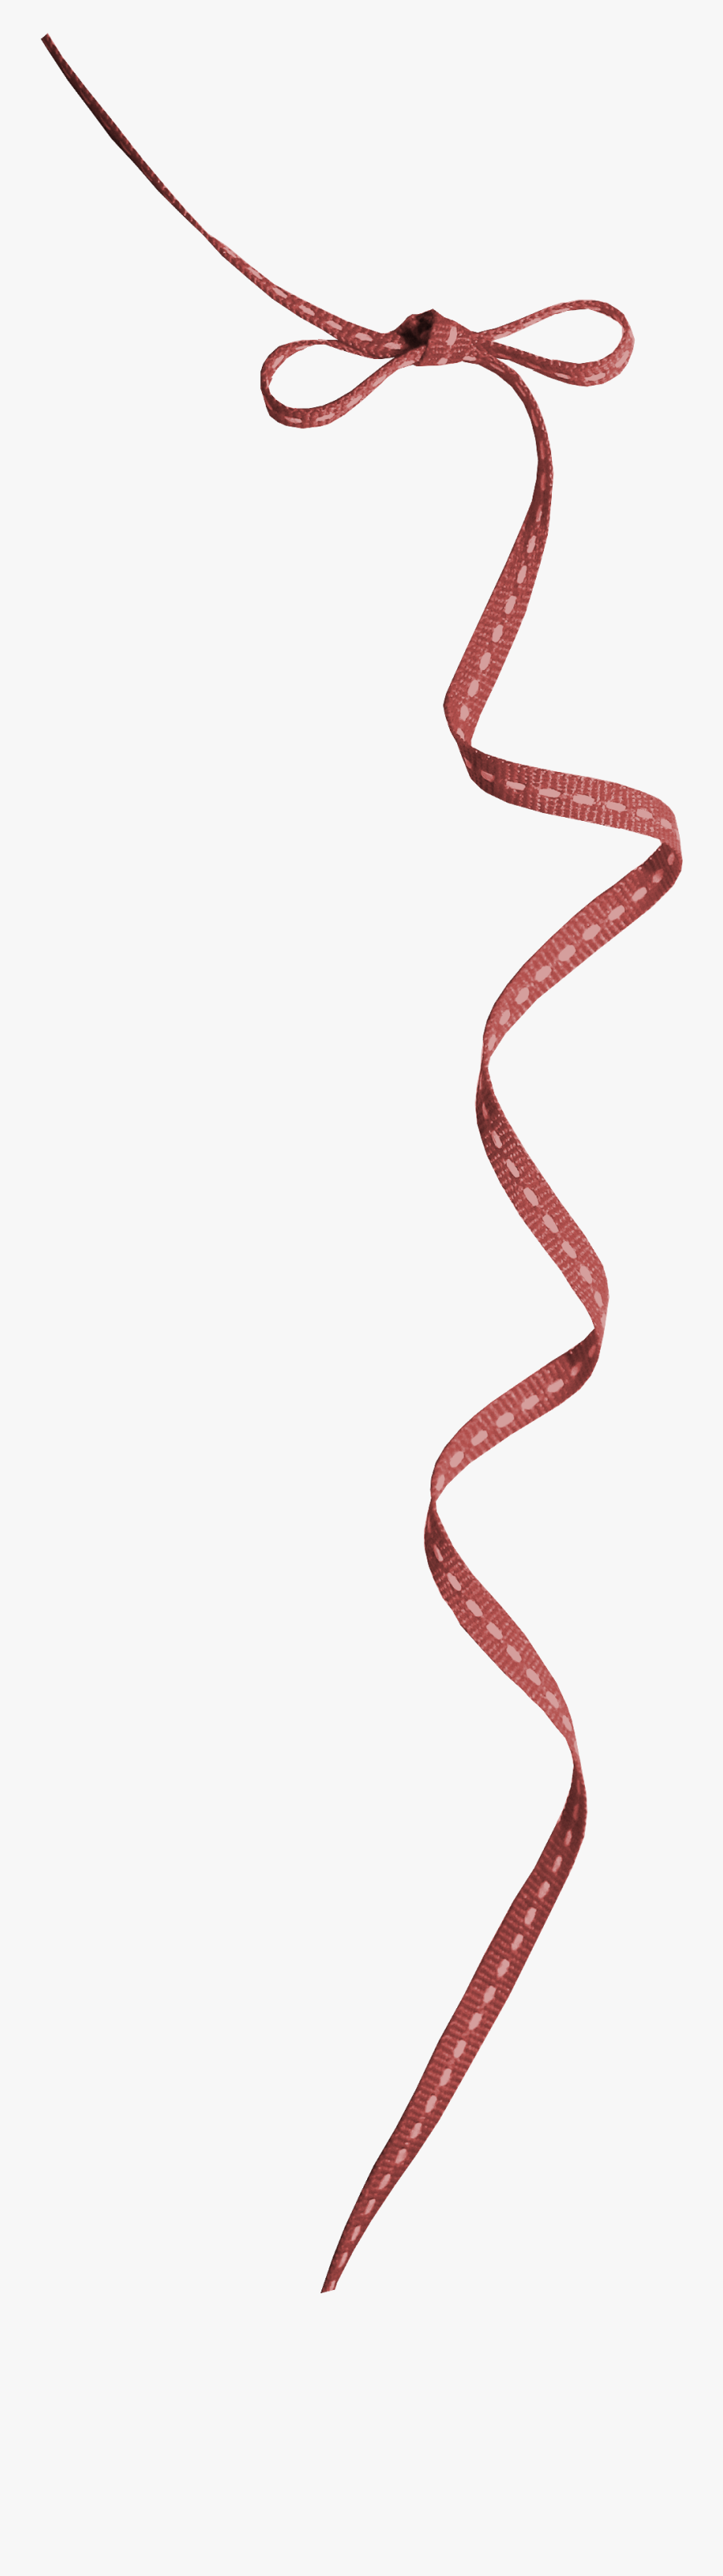 Redribbon - Red Curling Ribbon Png, Transparent Clipart